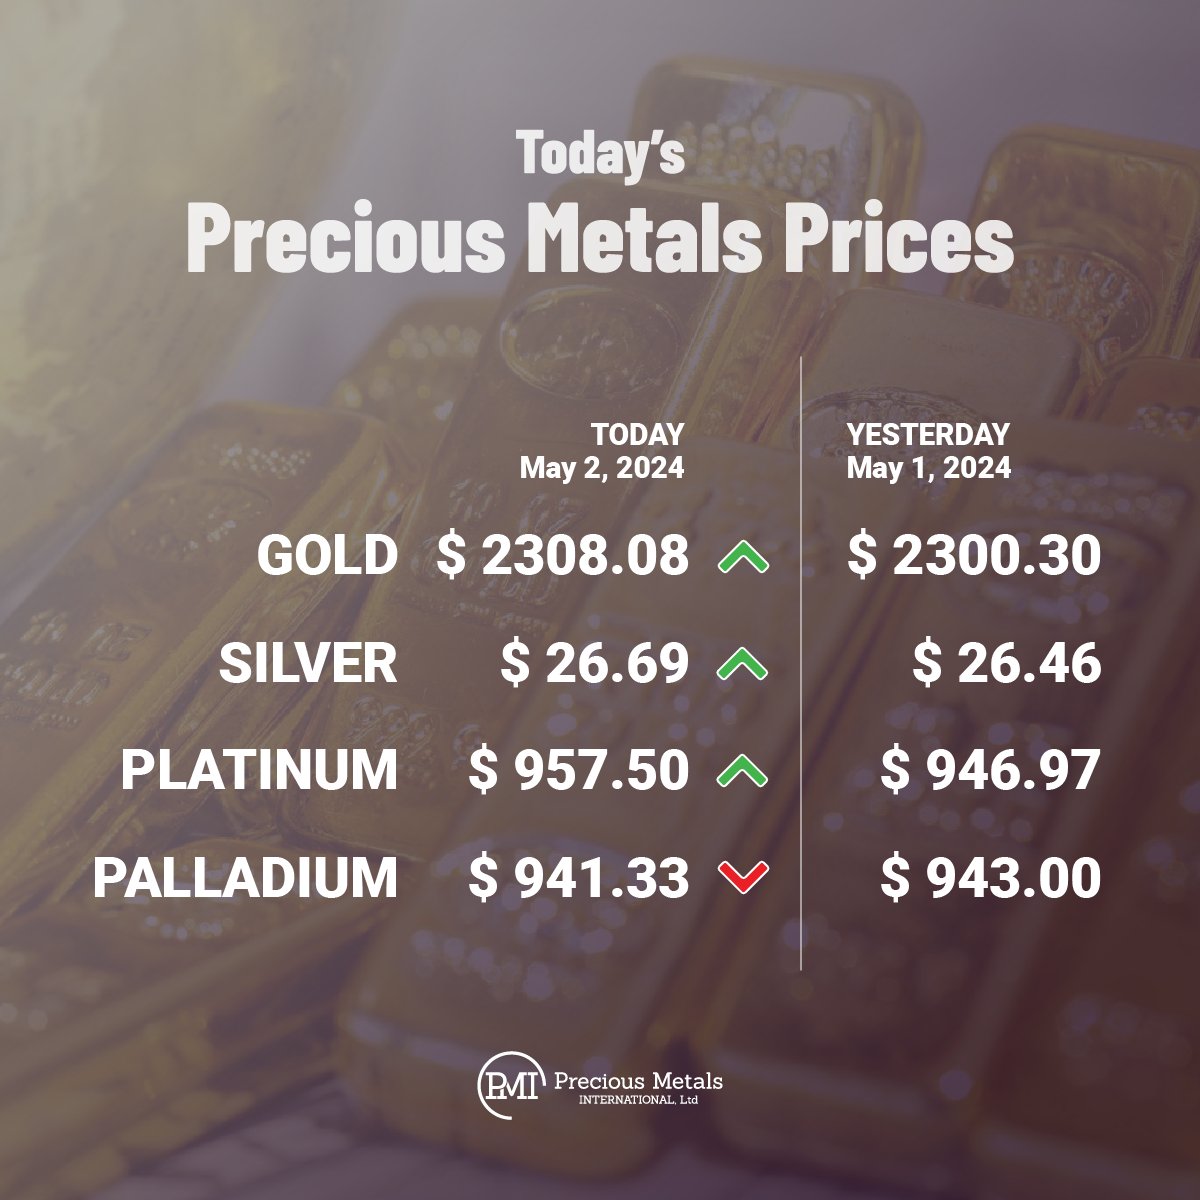 Today’s precious metals prices as of Thursday, May 2nd, 2024.
·
·
·
#BullionPMI #Gold #Silver #Platinum #Palladium #PreciousMetals #Prices #BuyGold #BuySilver #InGoldWeTrust 🥇💛🟡🌕🟨🪙⬜️🔘◻️📈✨🤯👍🏼🔥